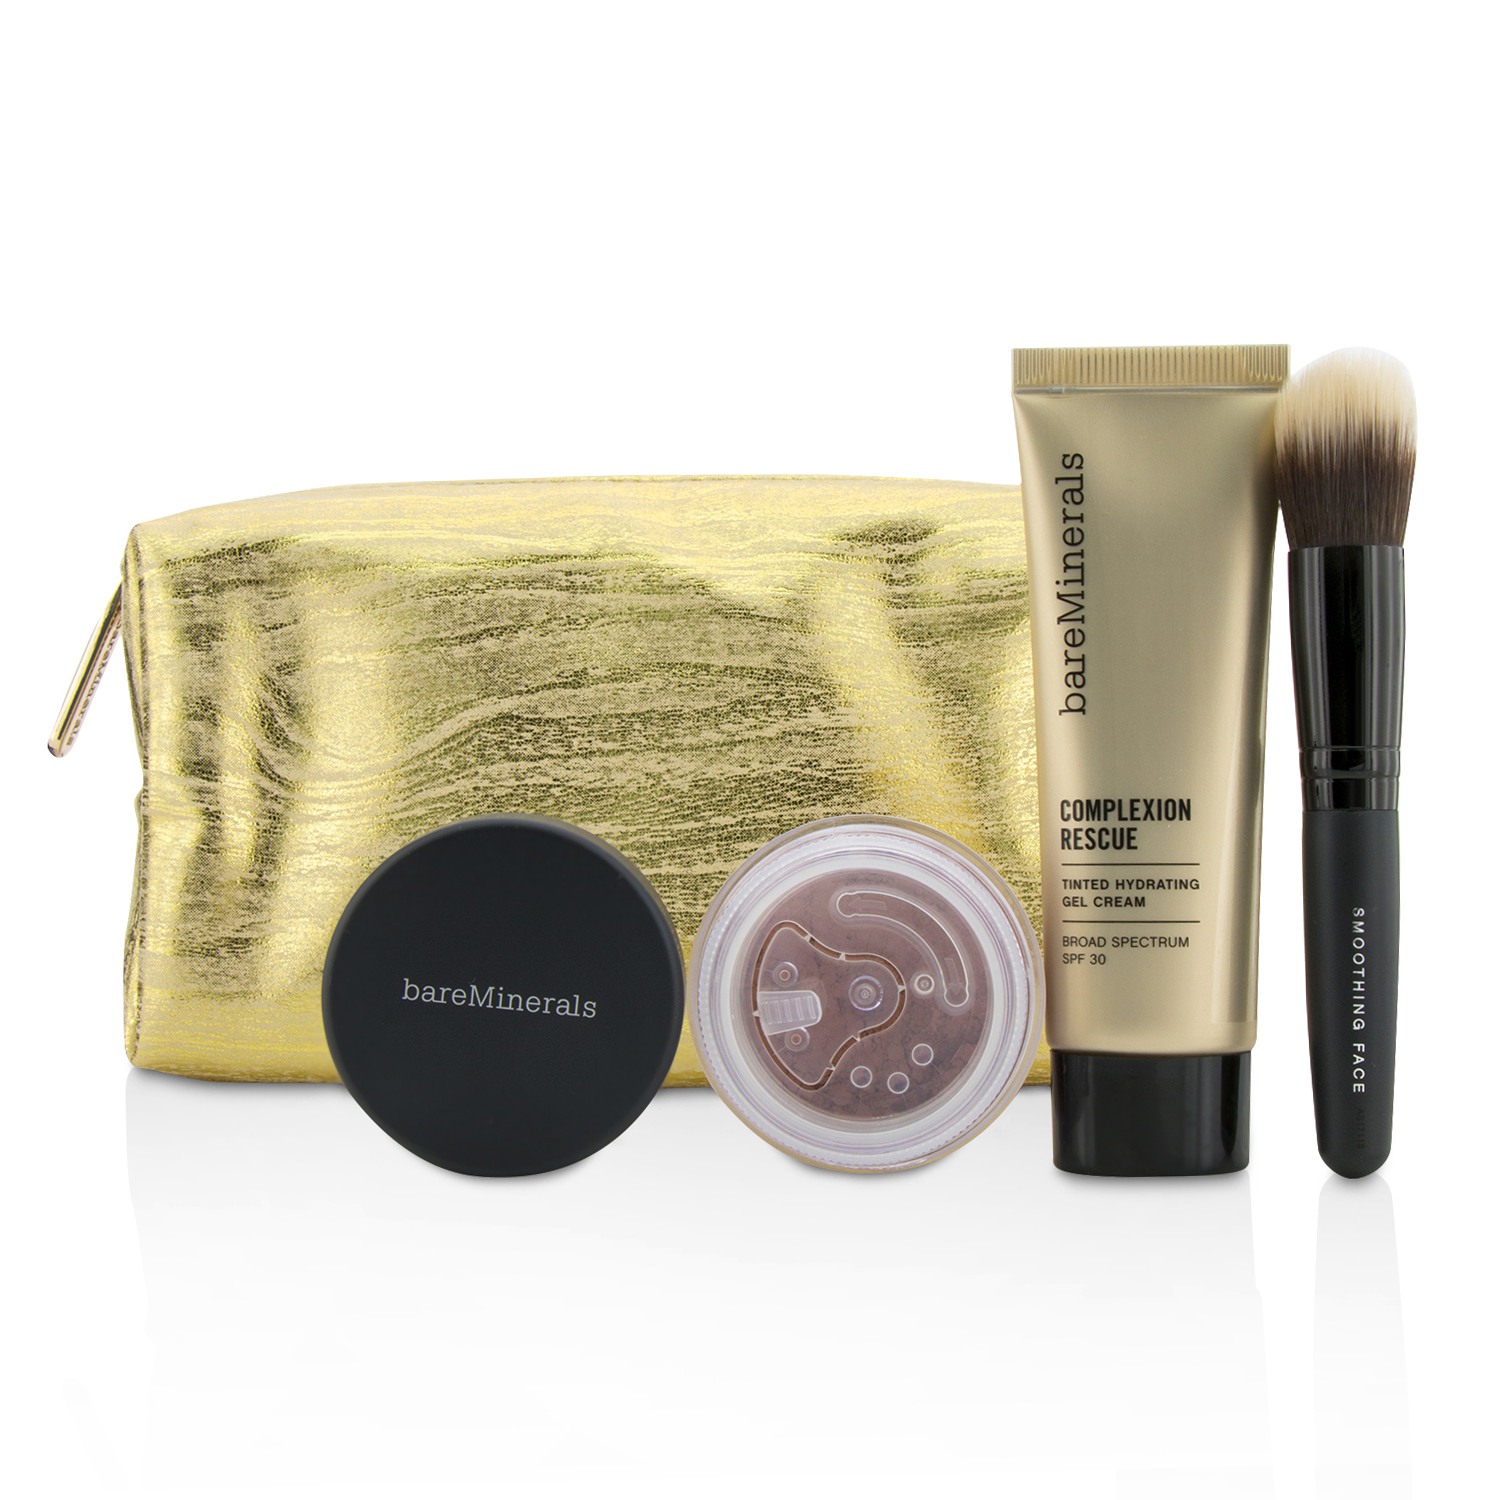 Take Me With You Complexion Rescue Try Me Set - # 09 Chestnut BareMinerals Image